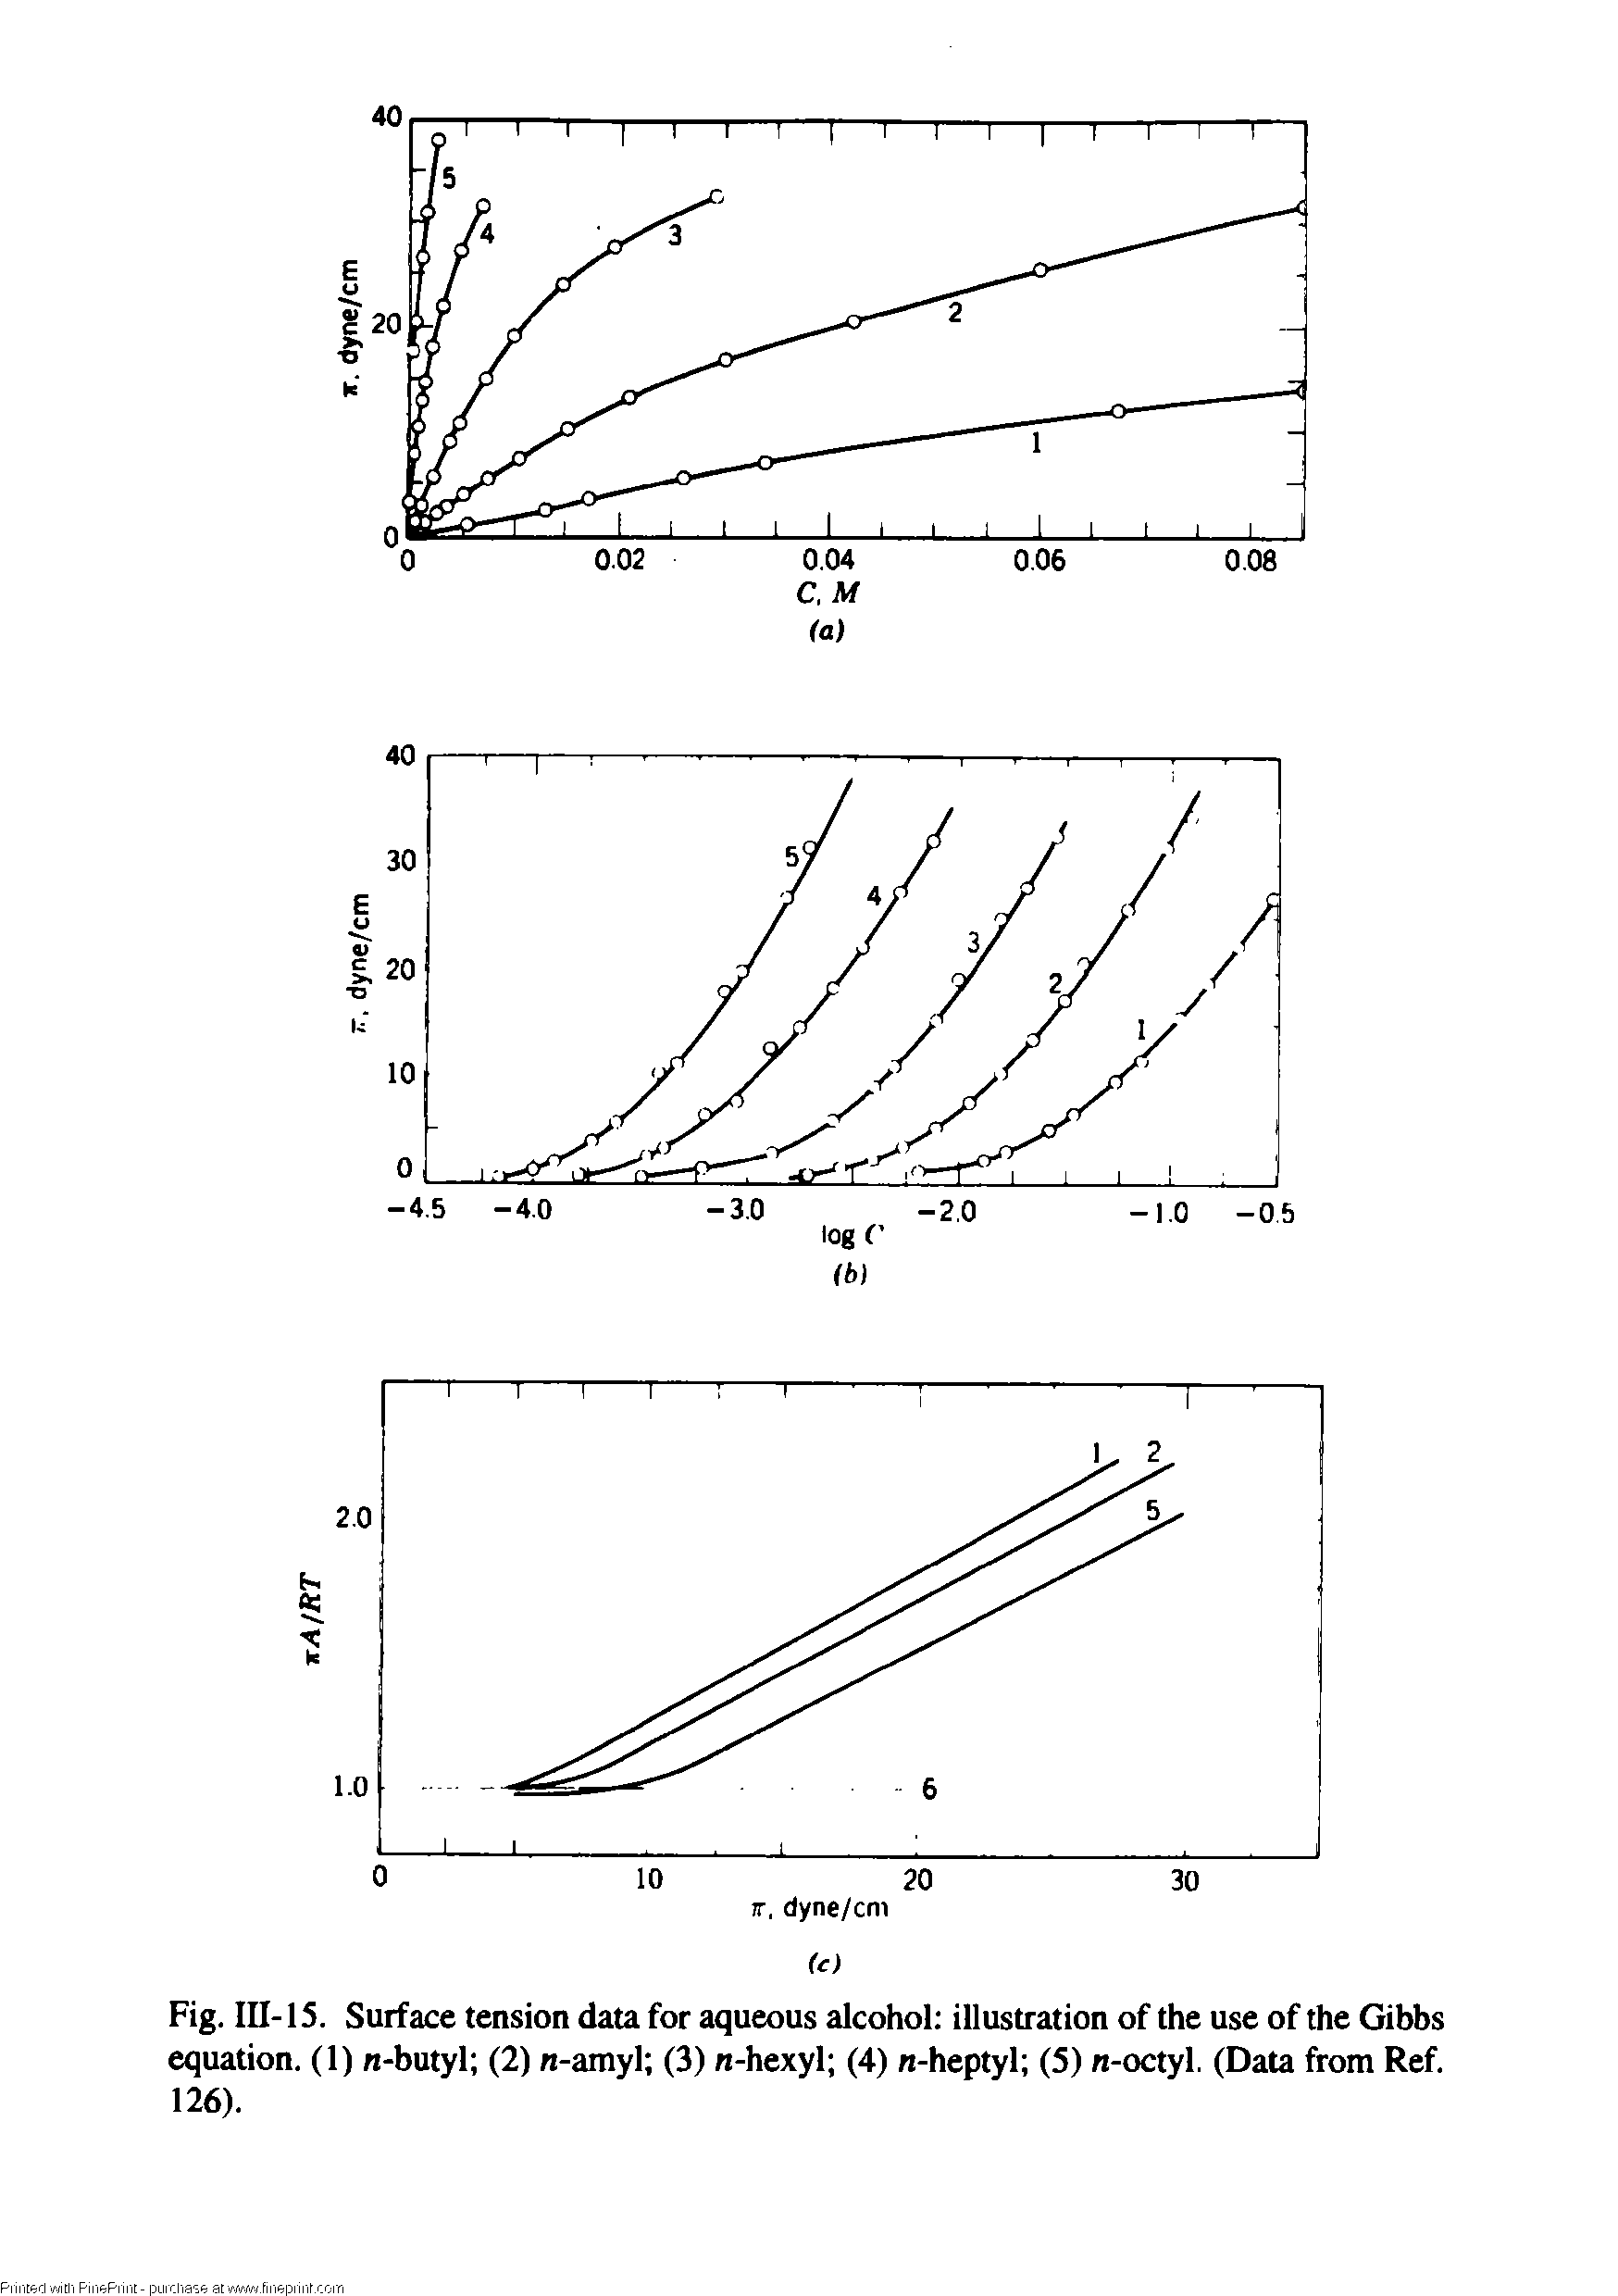 Fig. Ill-IS. Surface tension data for aqueous alcohol illustration of the use of the Gibbs equation. (1) -butyl (2) -amyl (3) -hexyl (4) -heptyl (5) -octyl. (Data from Ref. 126).